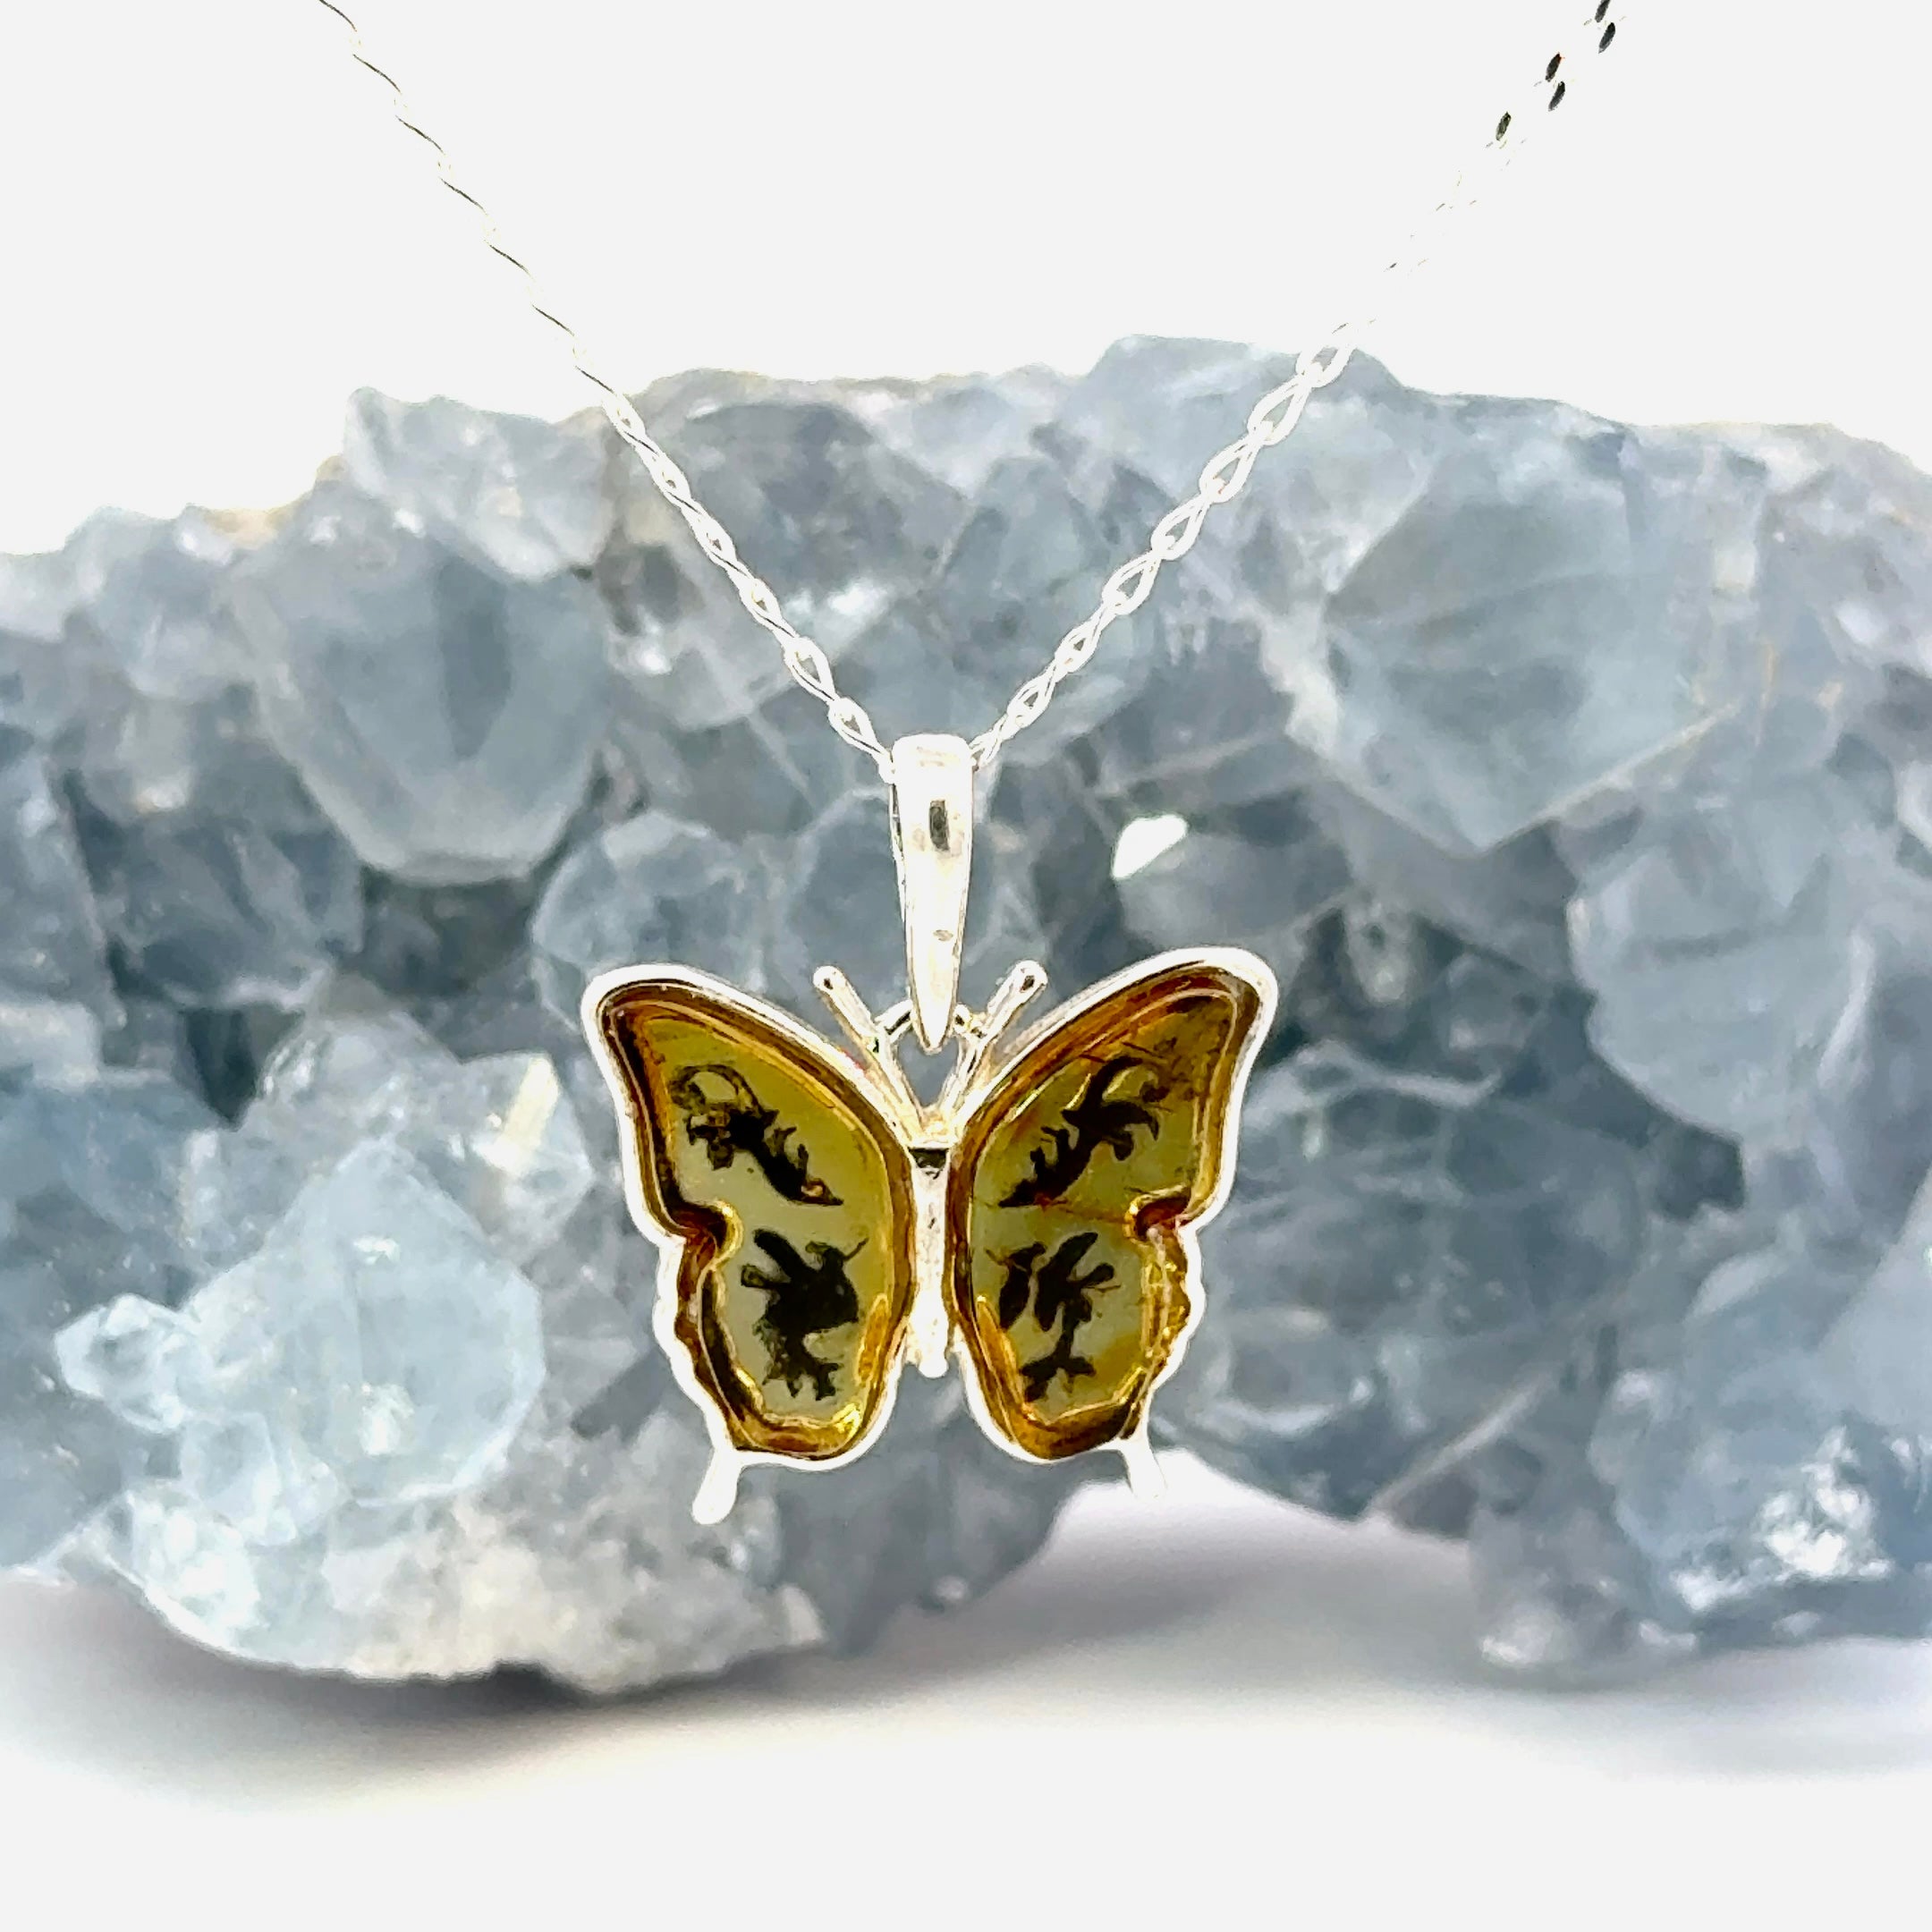 Amber Butterfly Necklace in Sterling Silver